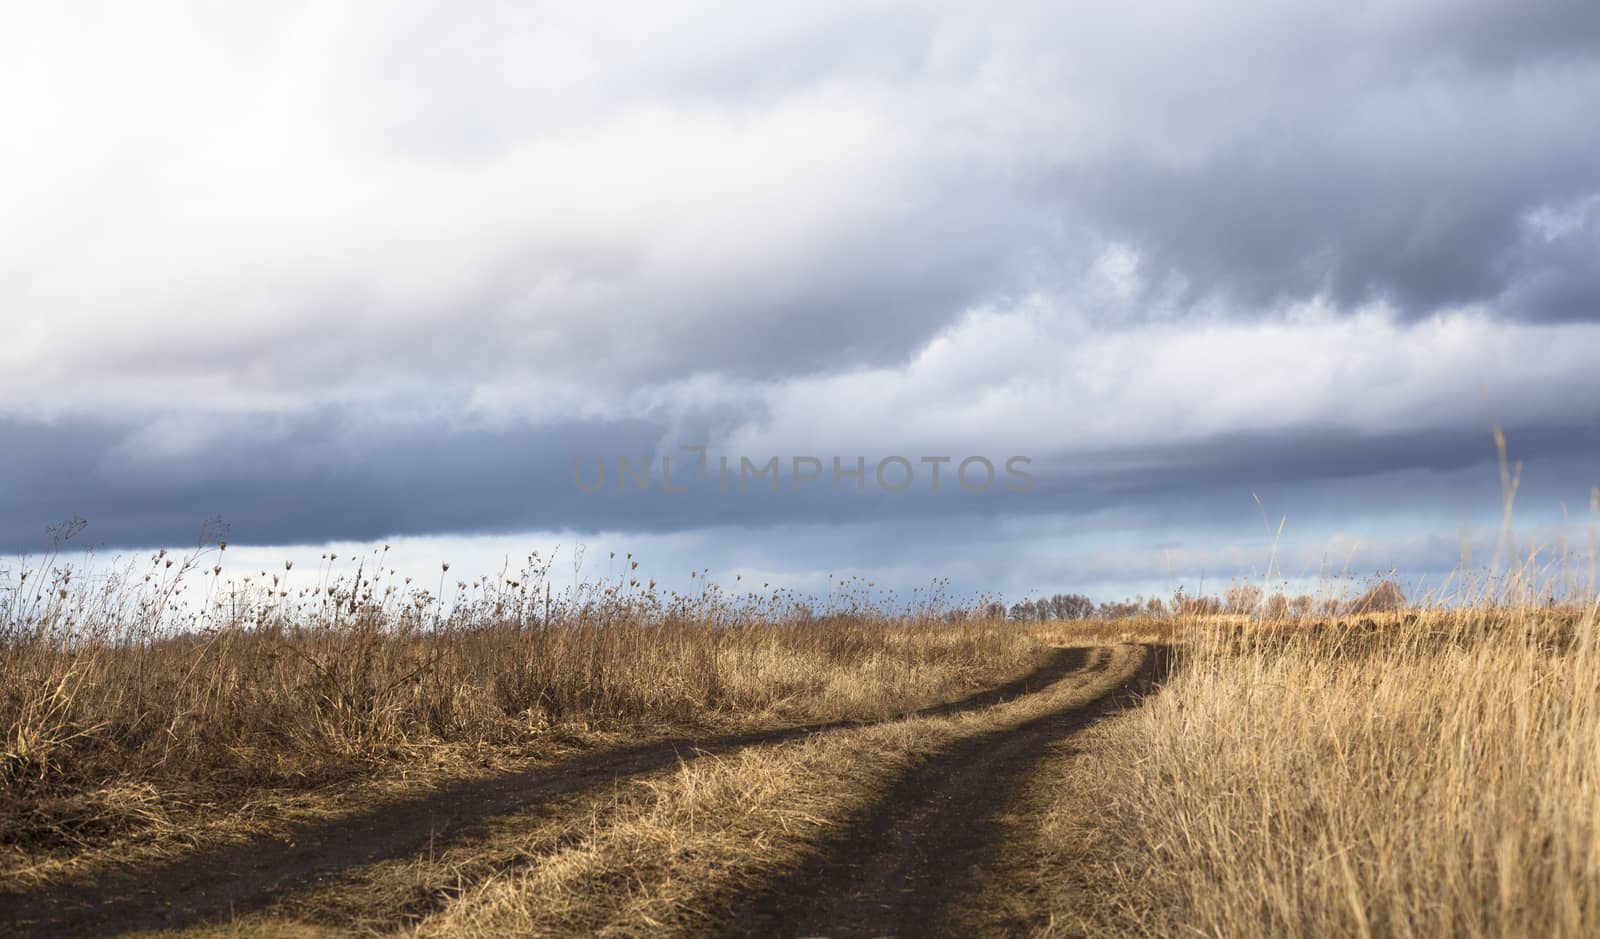 Dirt road in the dry field in a cloudy day.